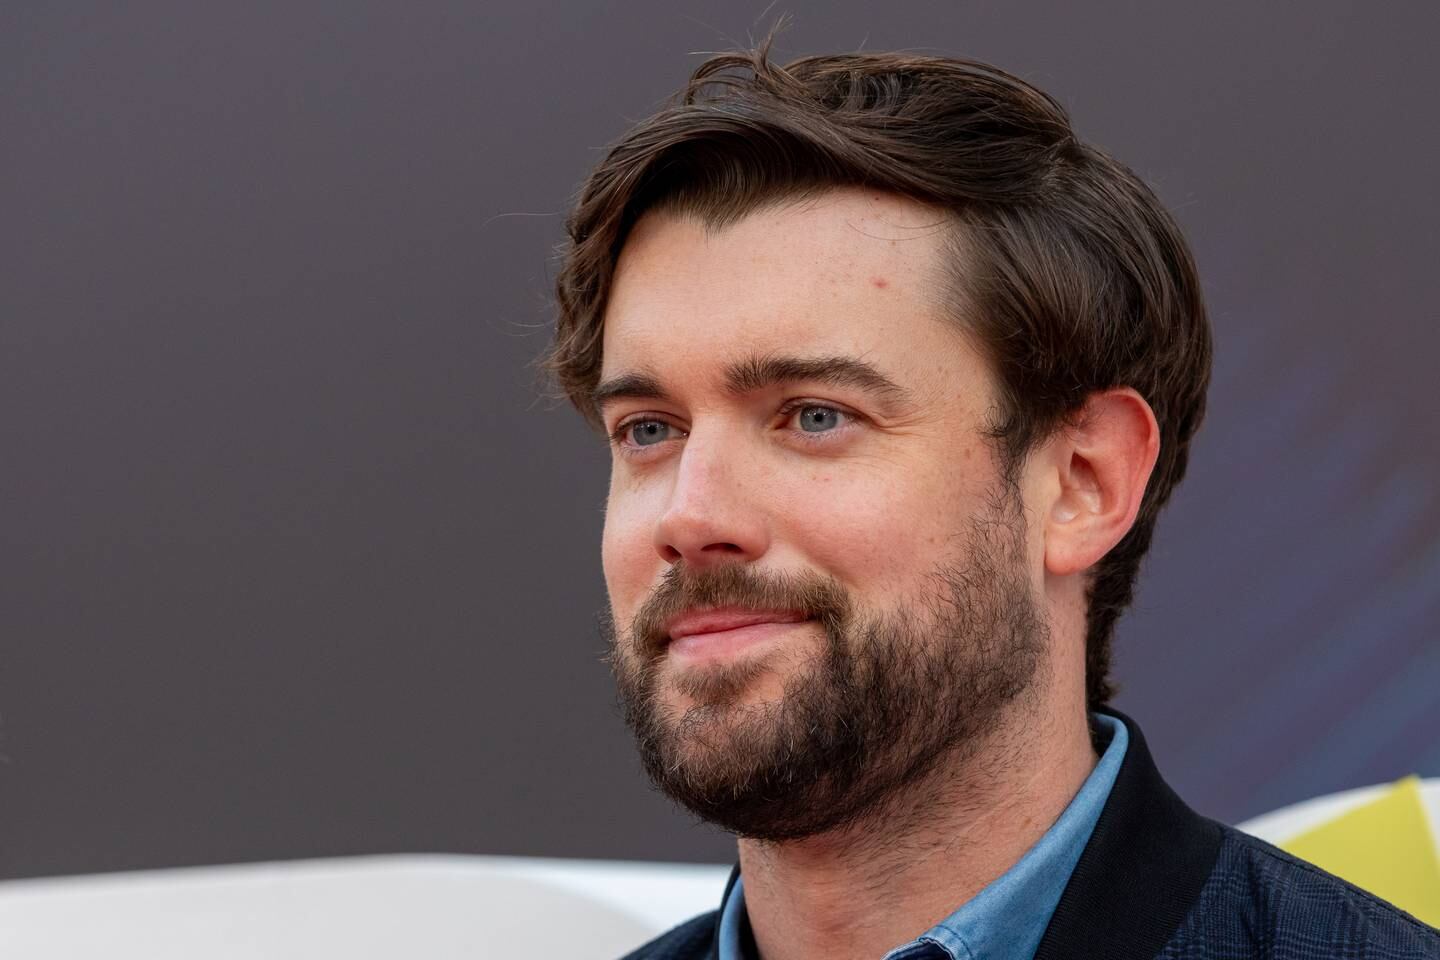 British comedian, Jack Whitehall is a long-time visitor to the UAE, both as a tourist with his family, and bringing his comedy stand up show. EPA